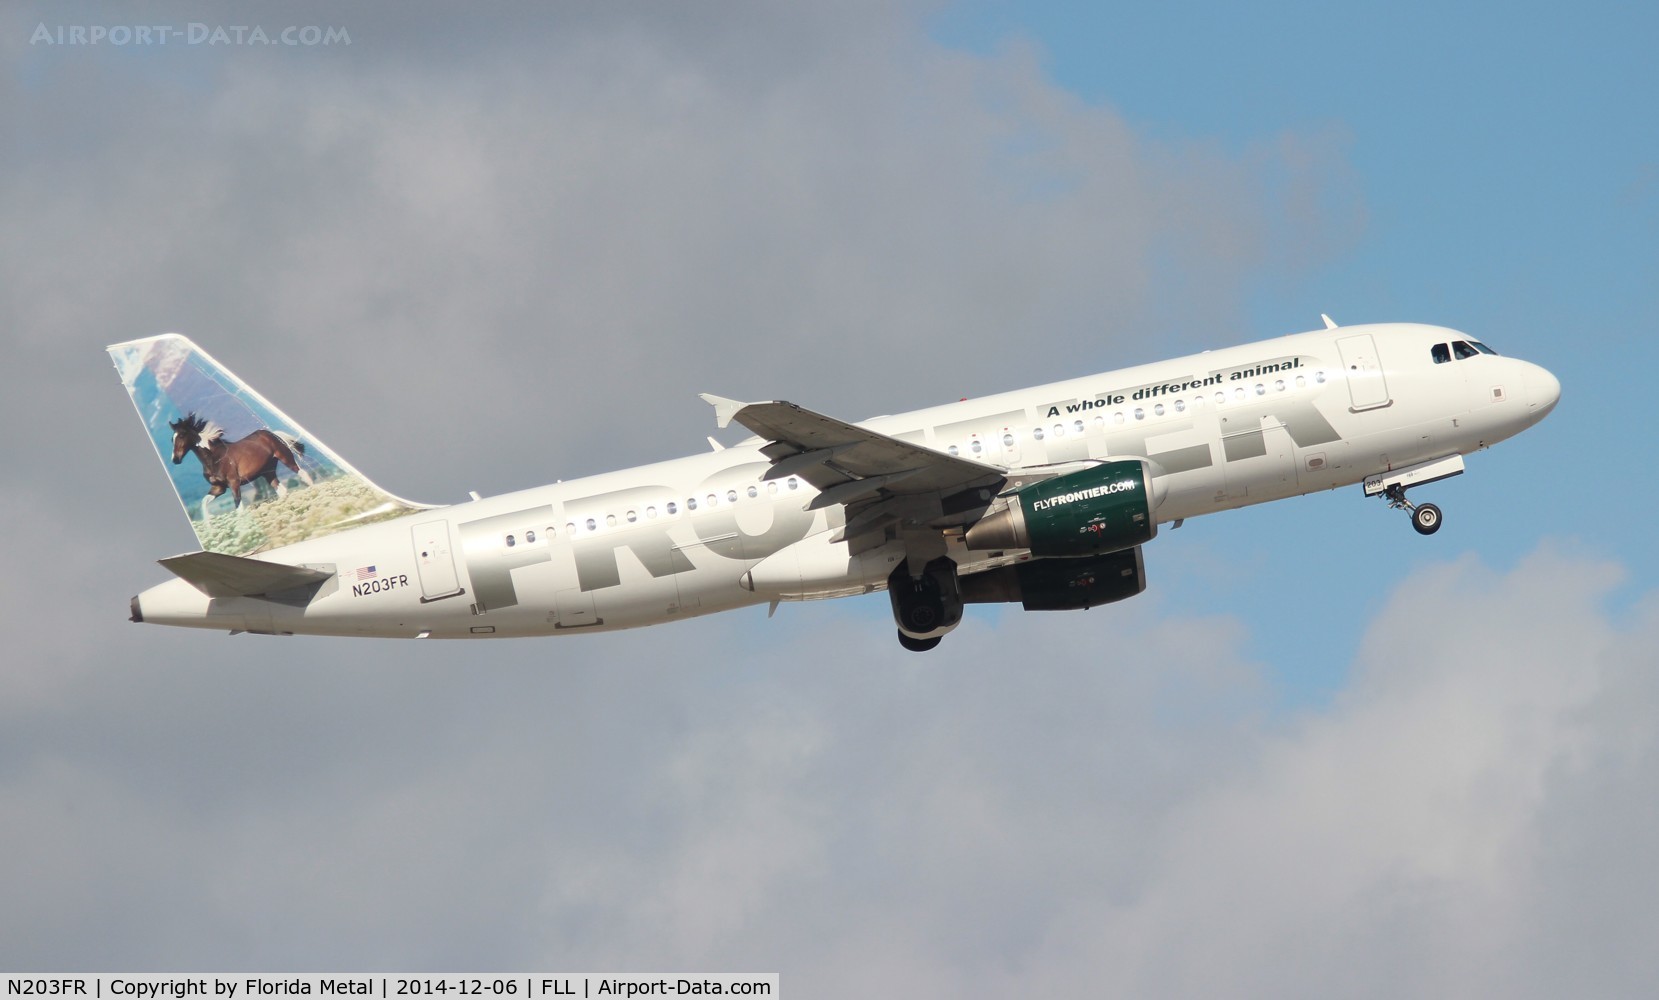 N203FR, 2002 Airbus A320-214 C/N 1806, Frontier Sally the Mustang